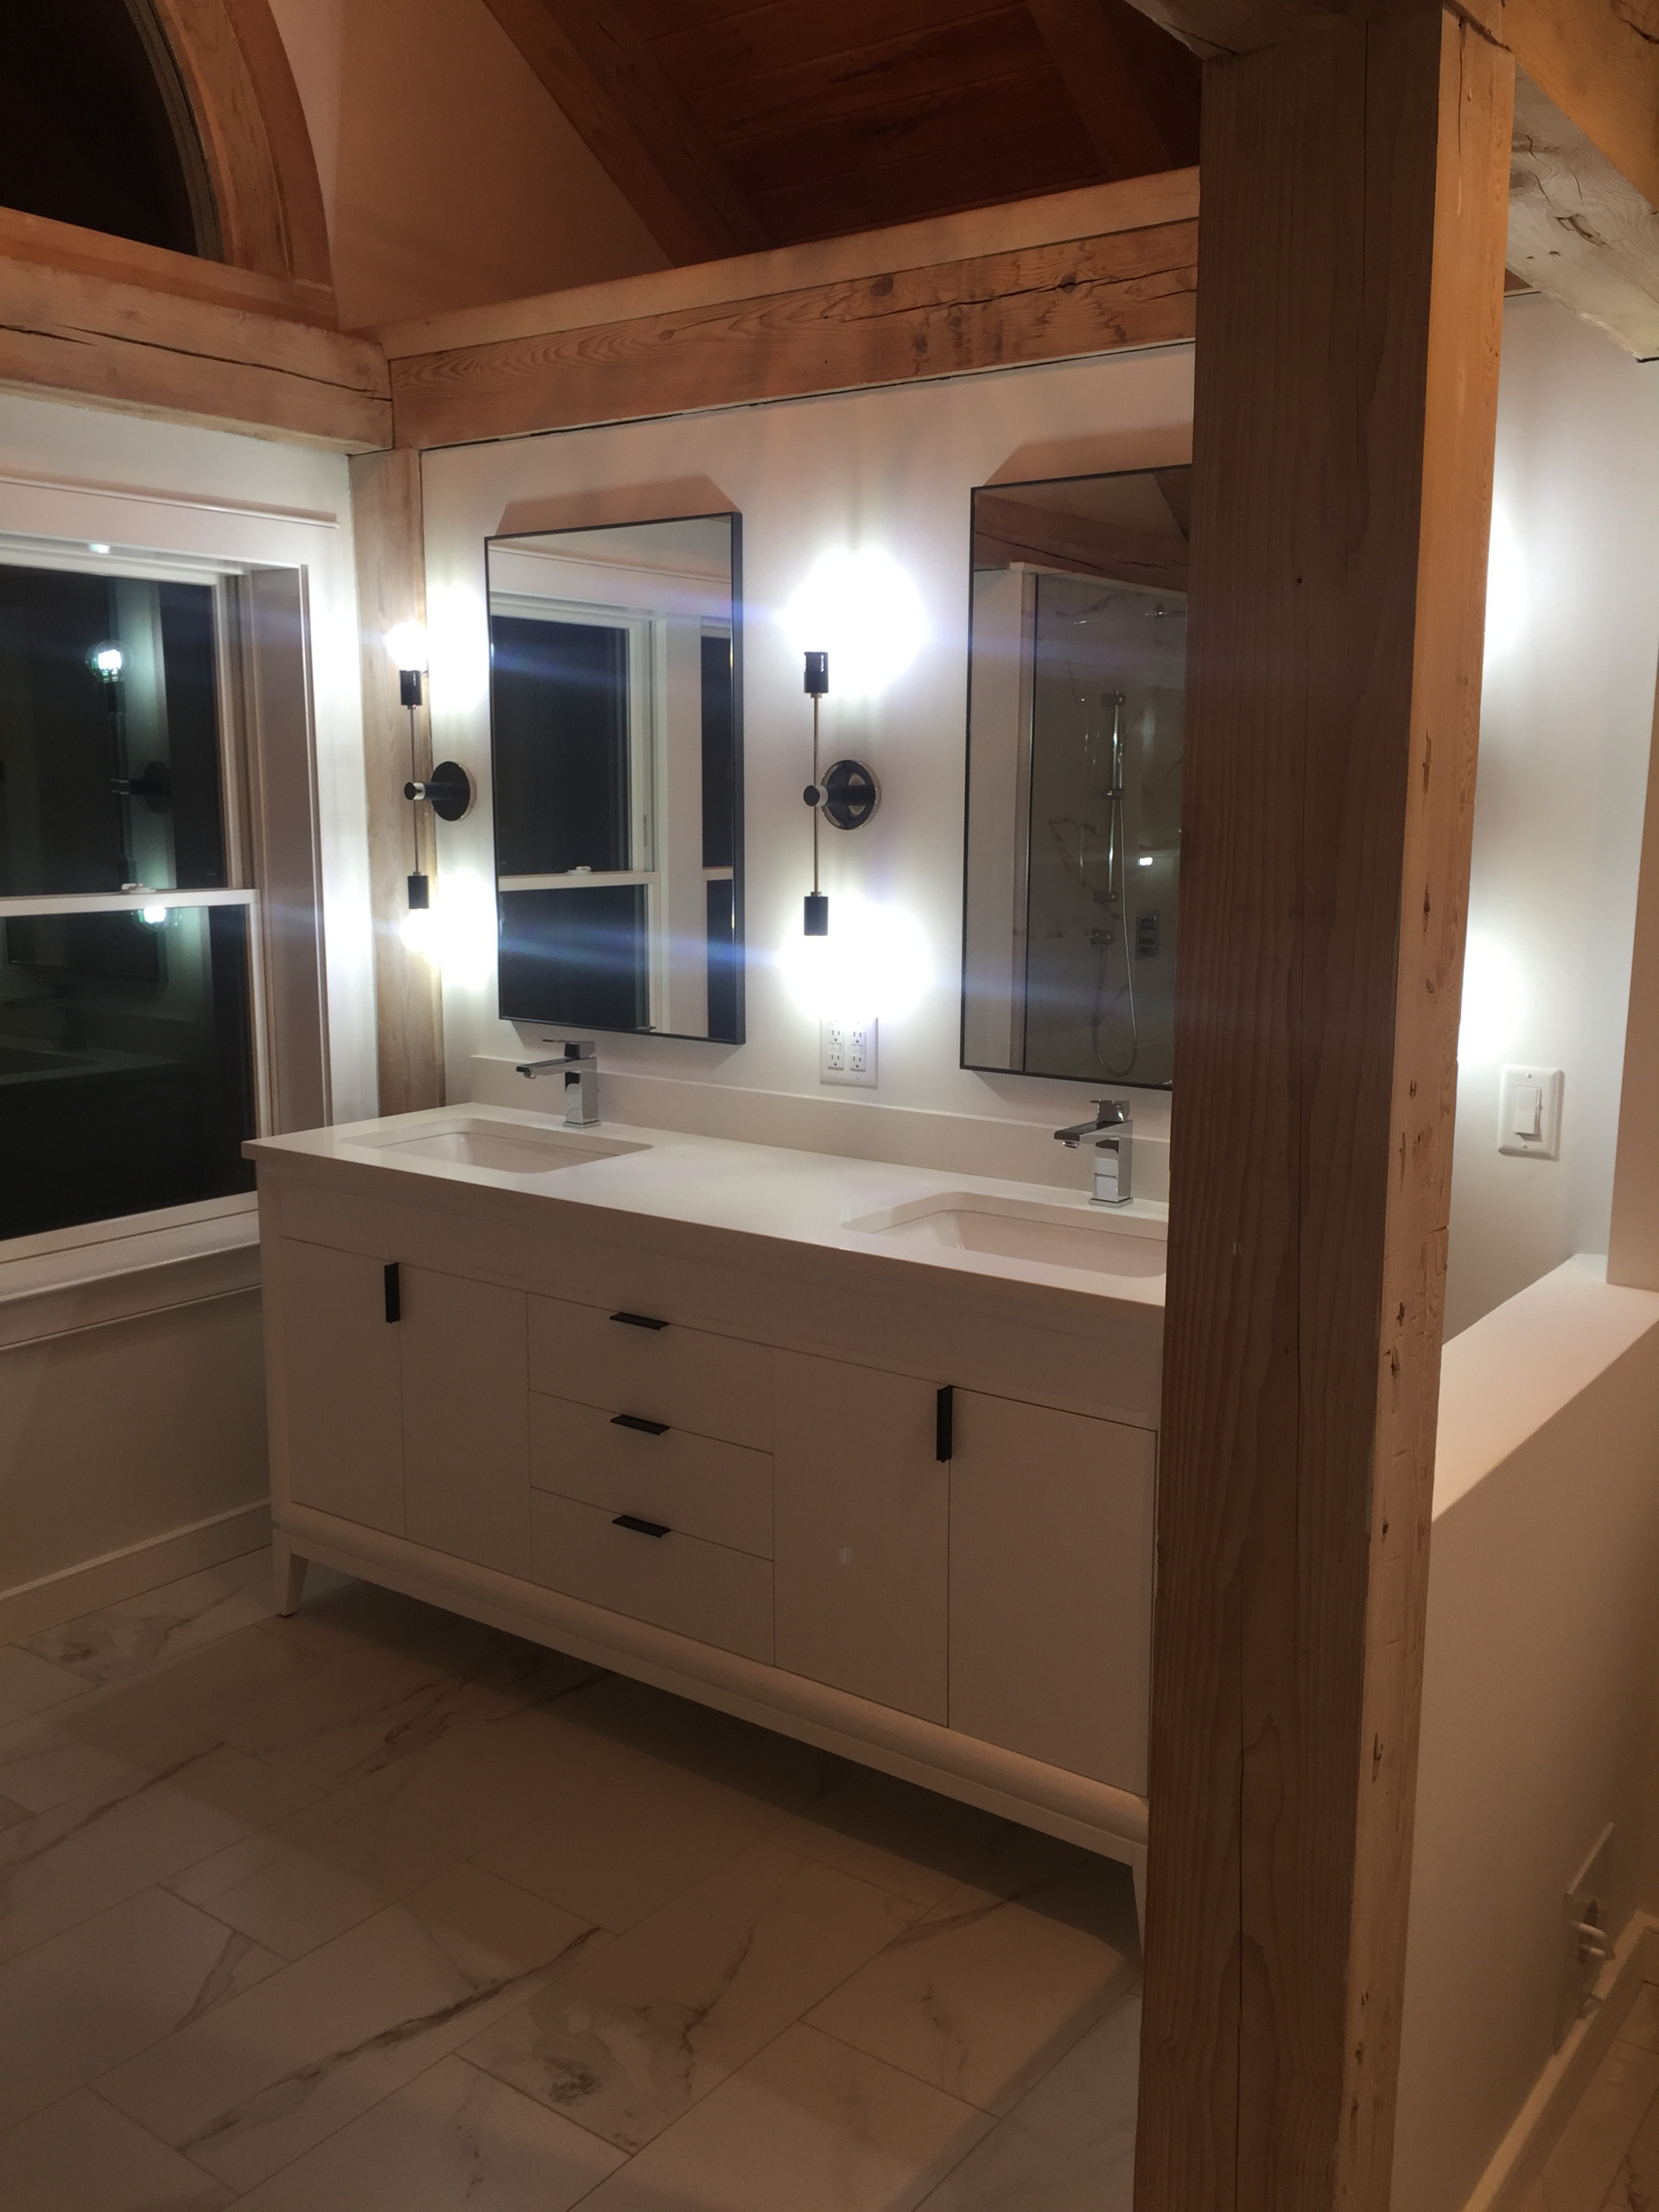 Master bathroom in a post and beam home